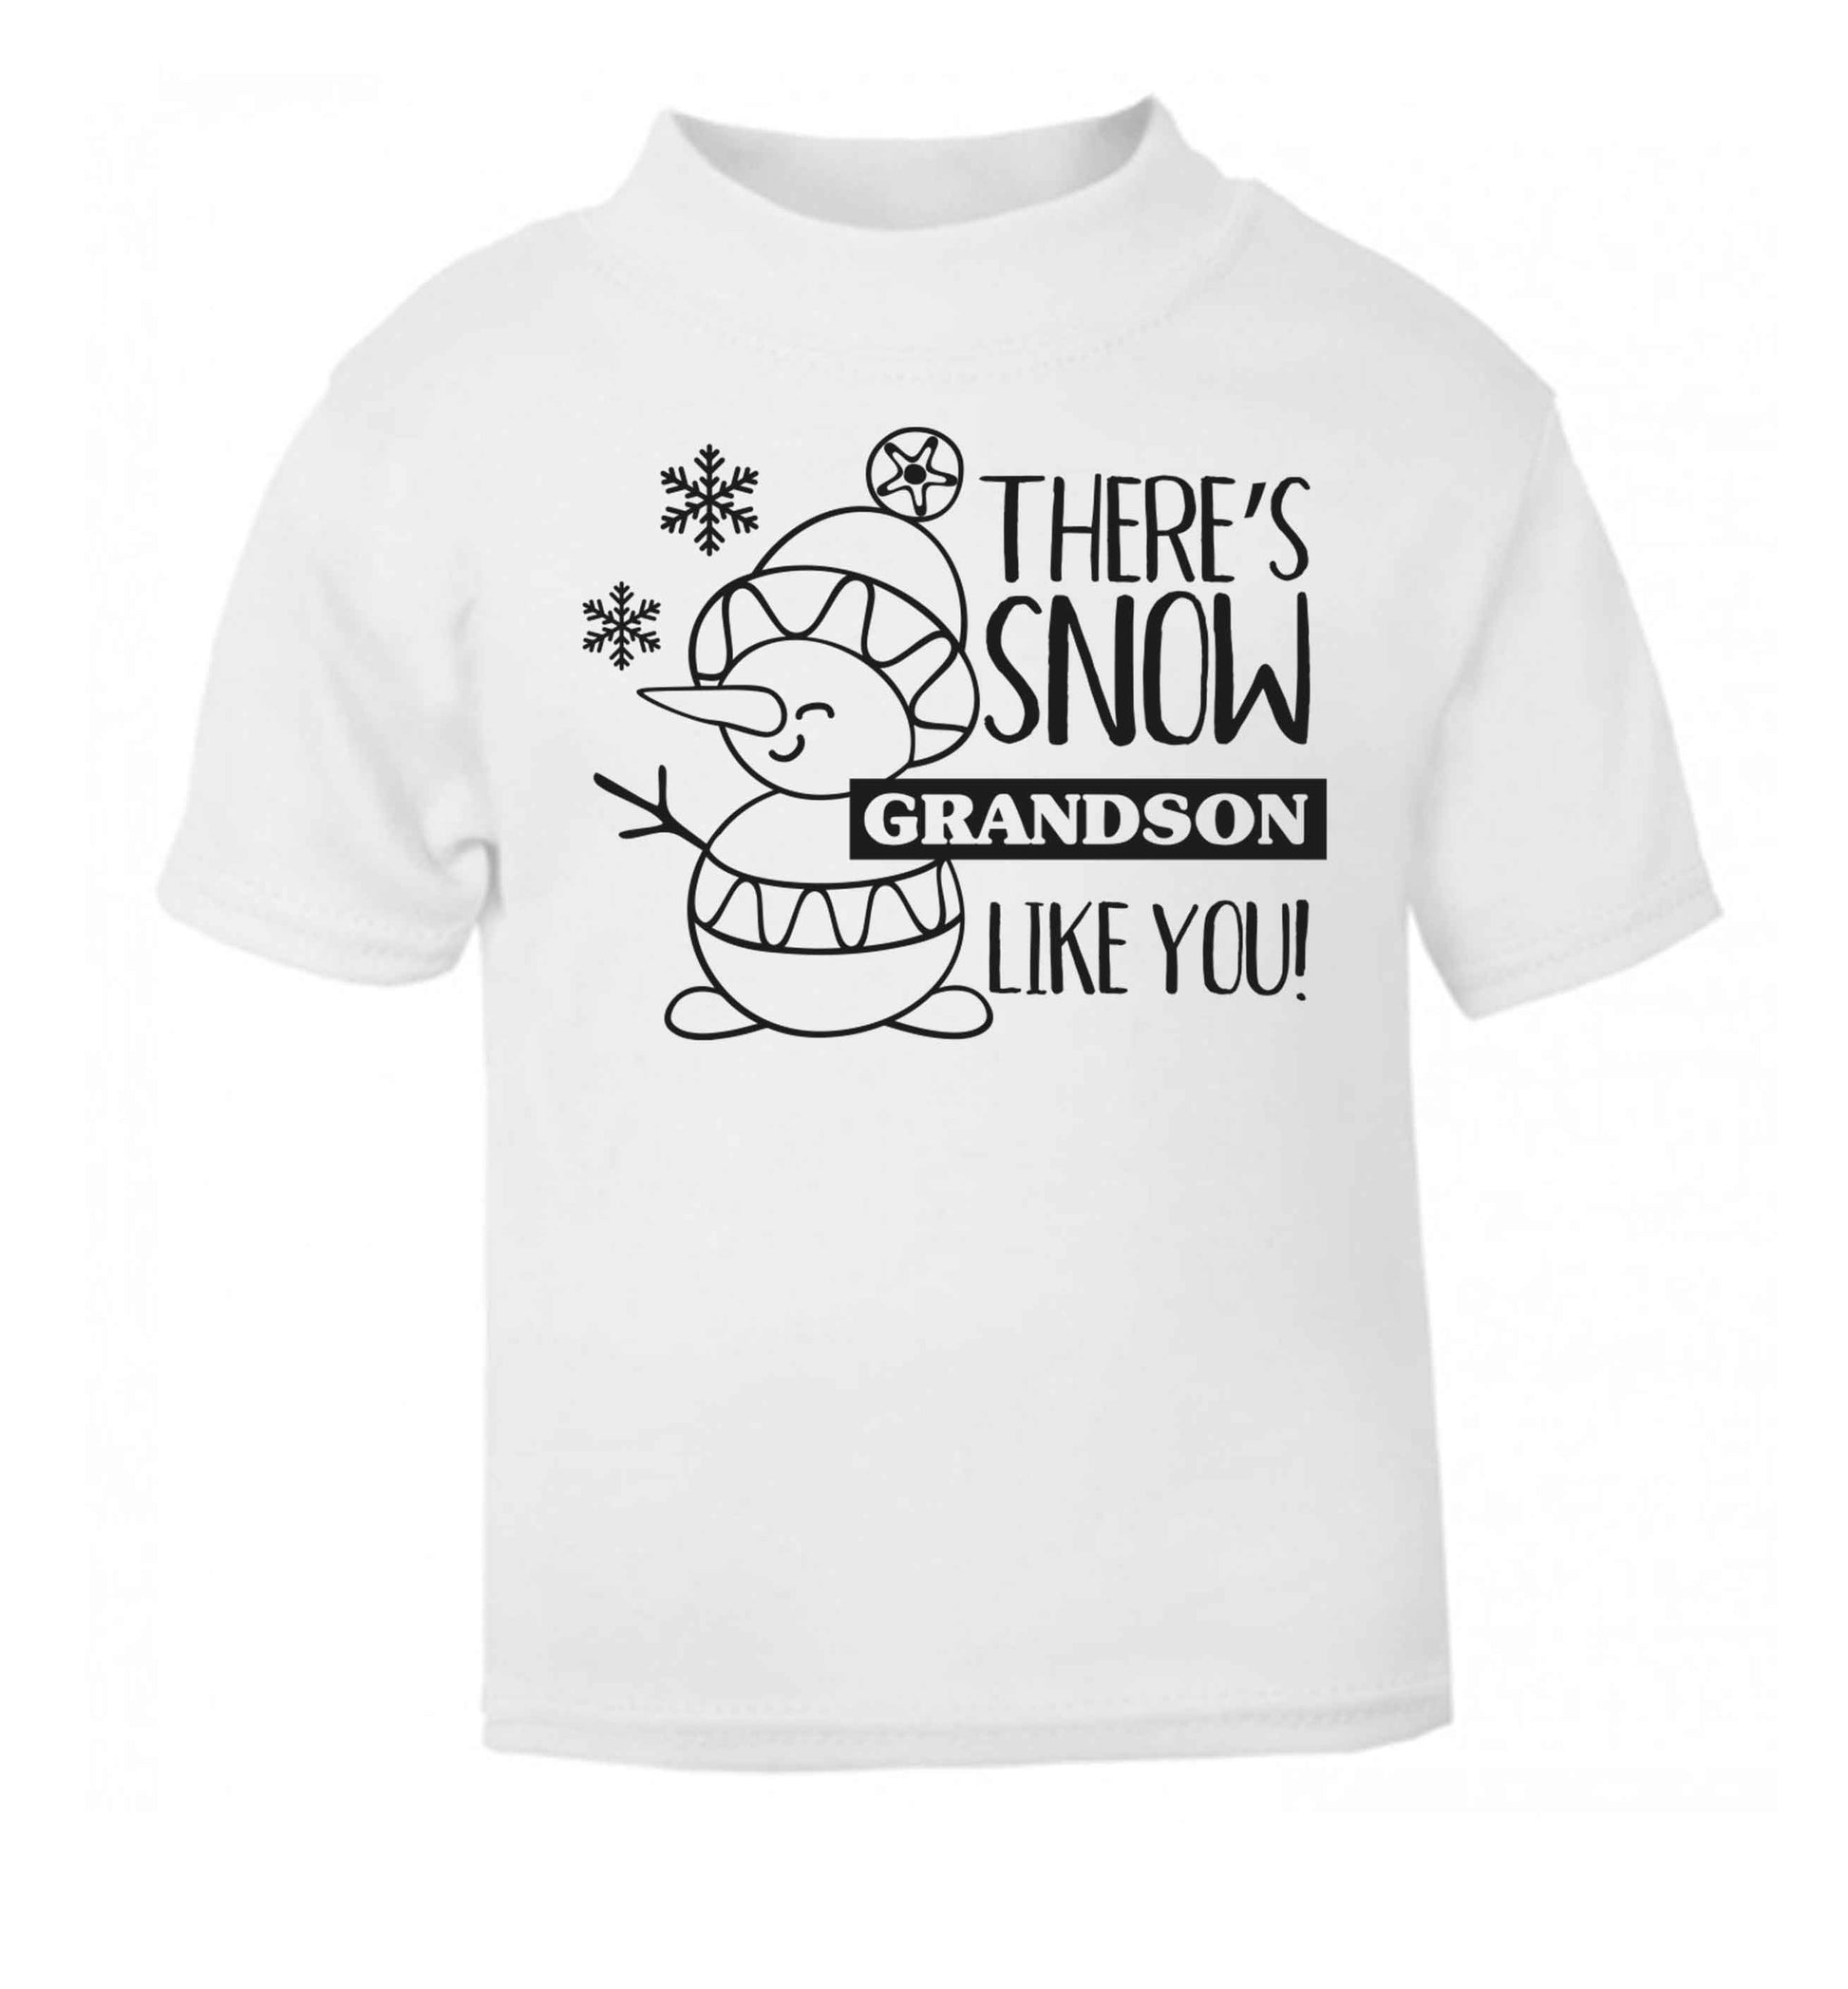 There's snow grandson like you white baby toddler Tshirt 2 Years